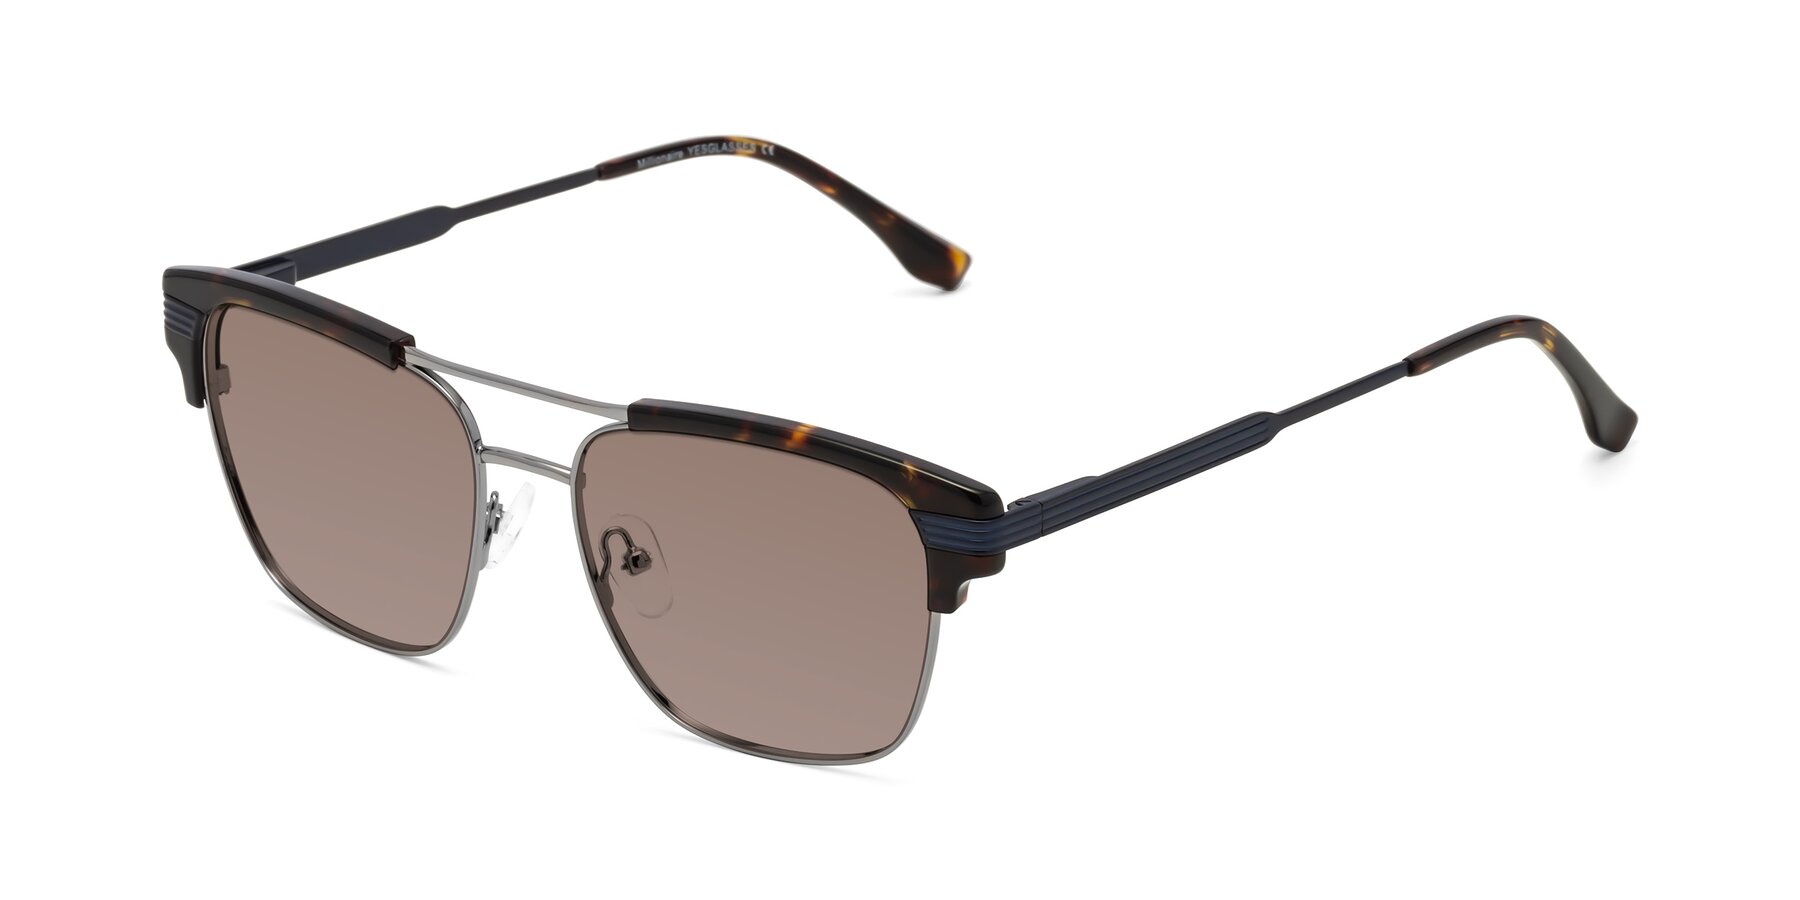 Angle of Millionaire in Tortoise-Gunmetal with Medium Brown Tinted Lenses